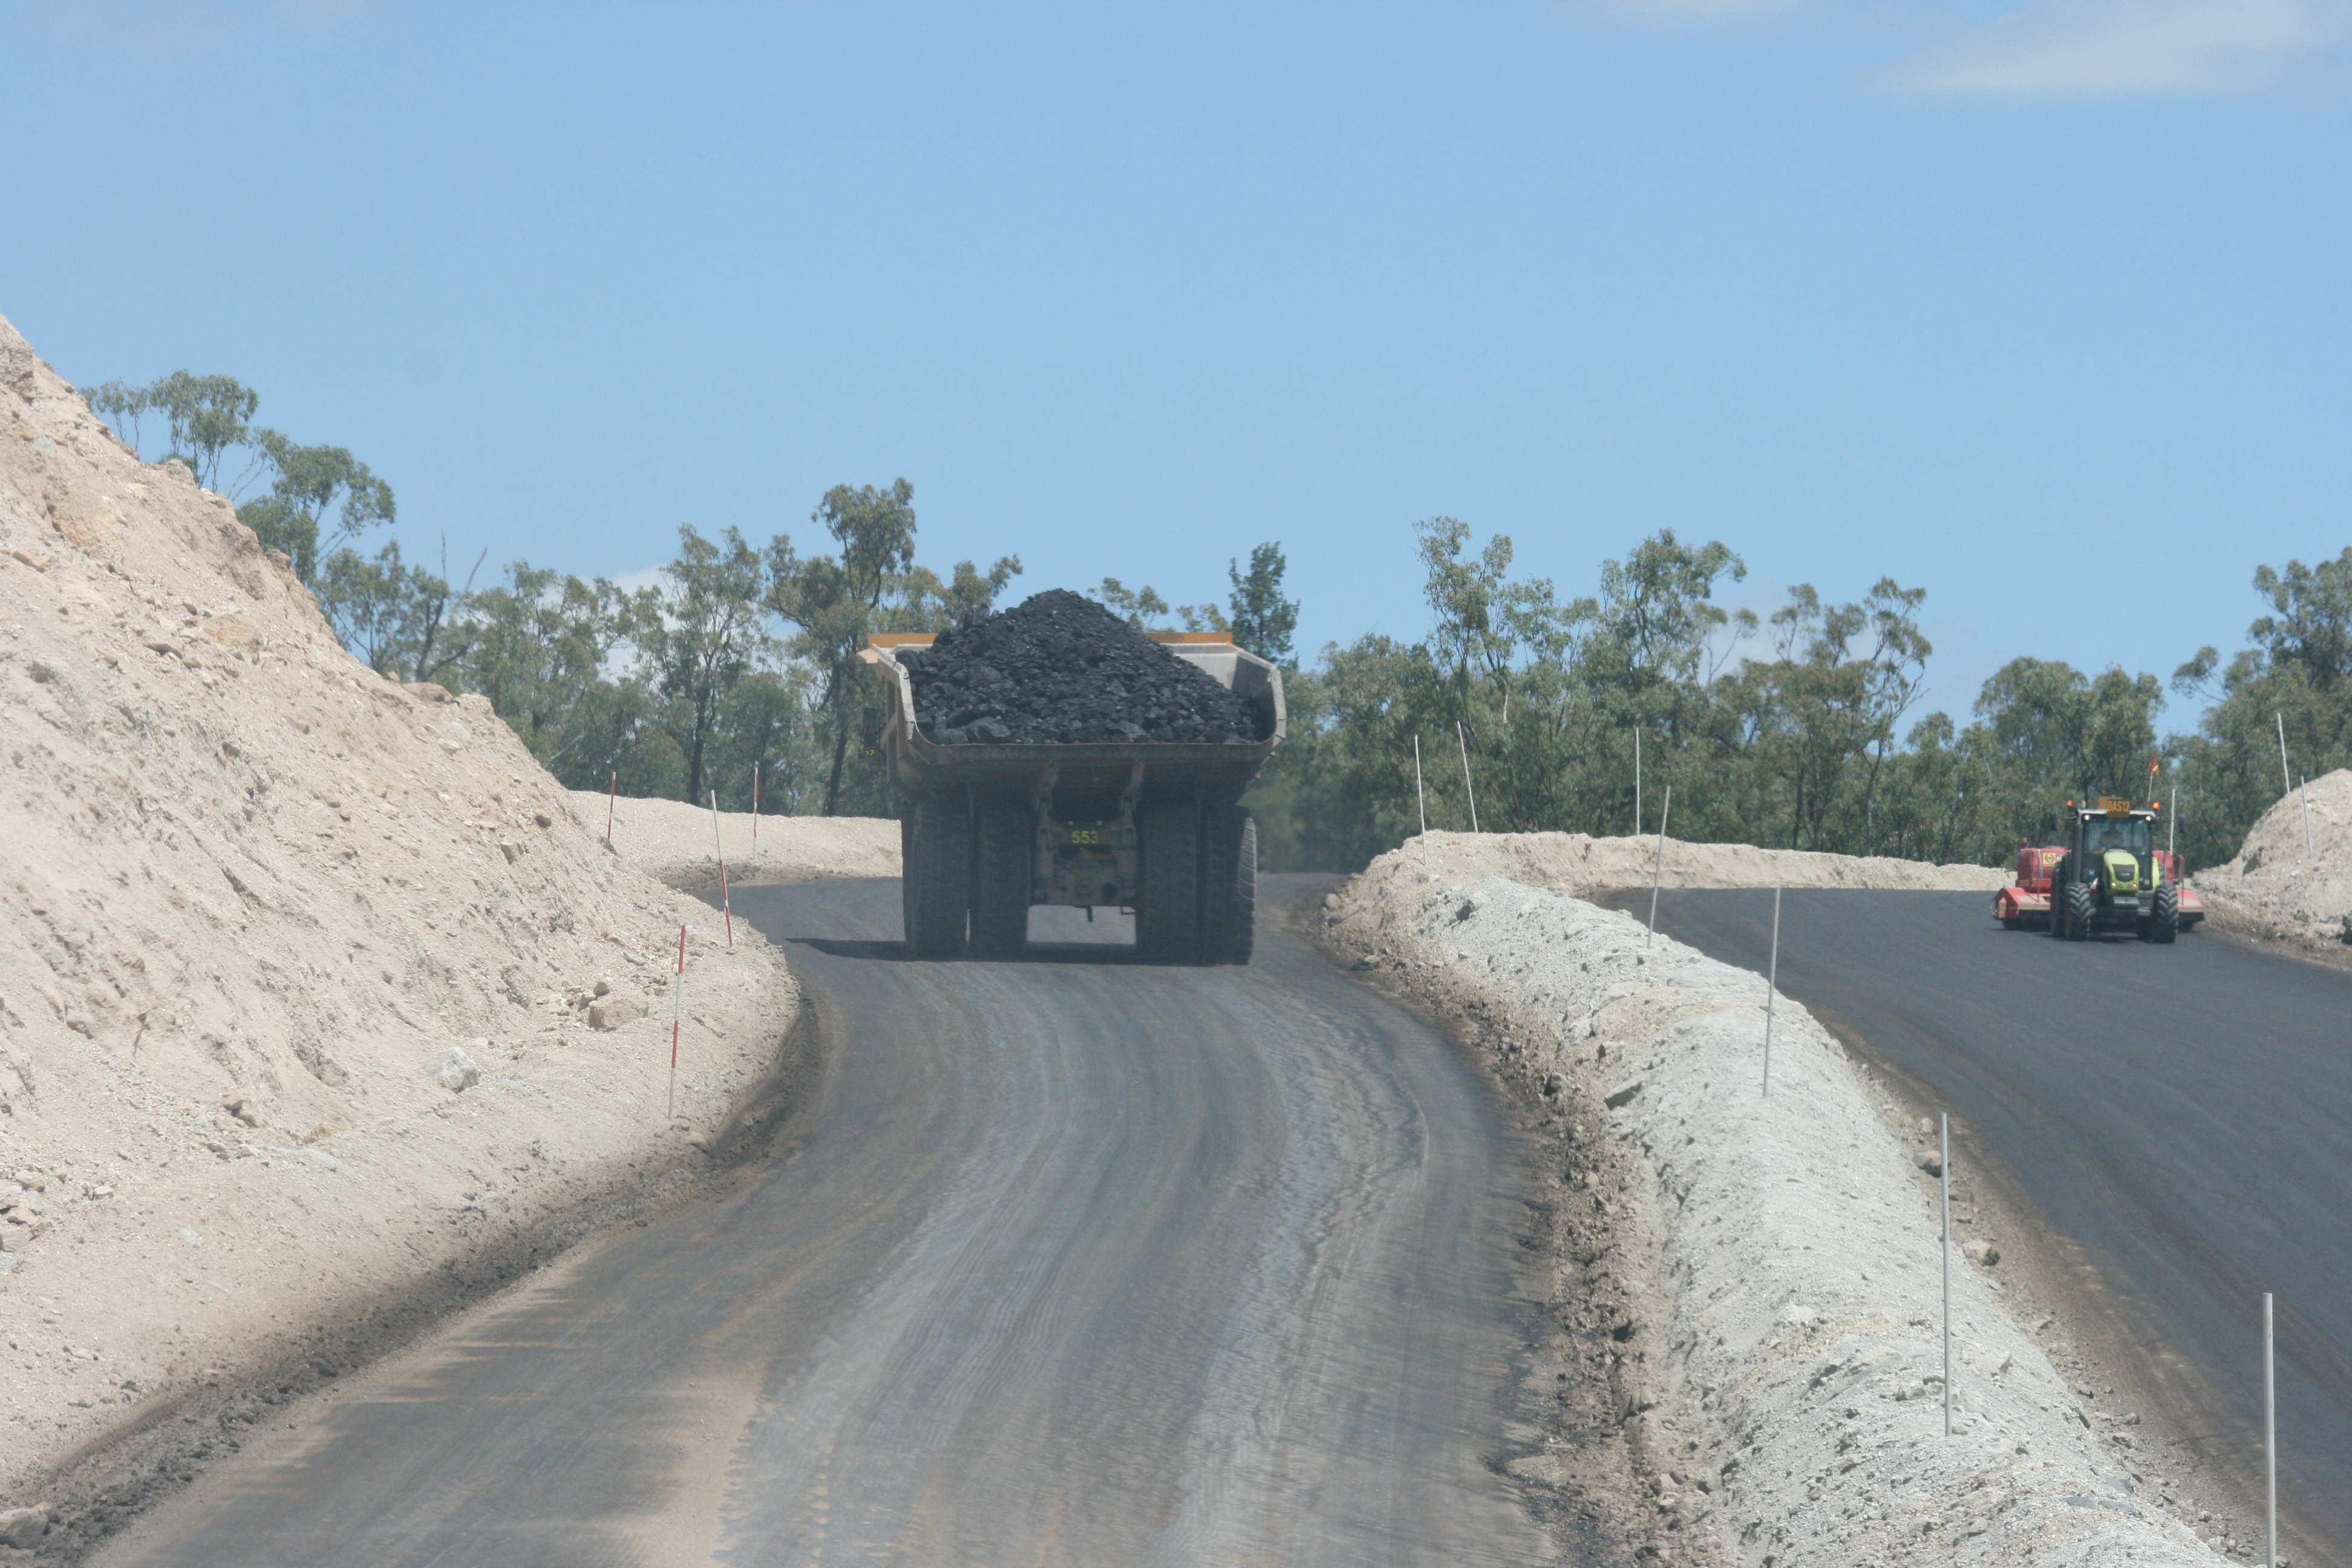 How can mines increase production by making haul roads work more efficiently?